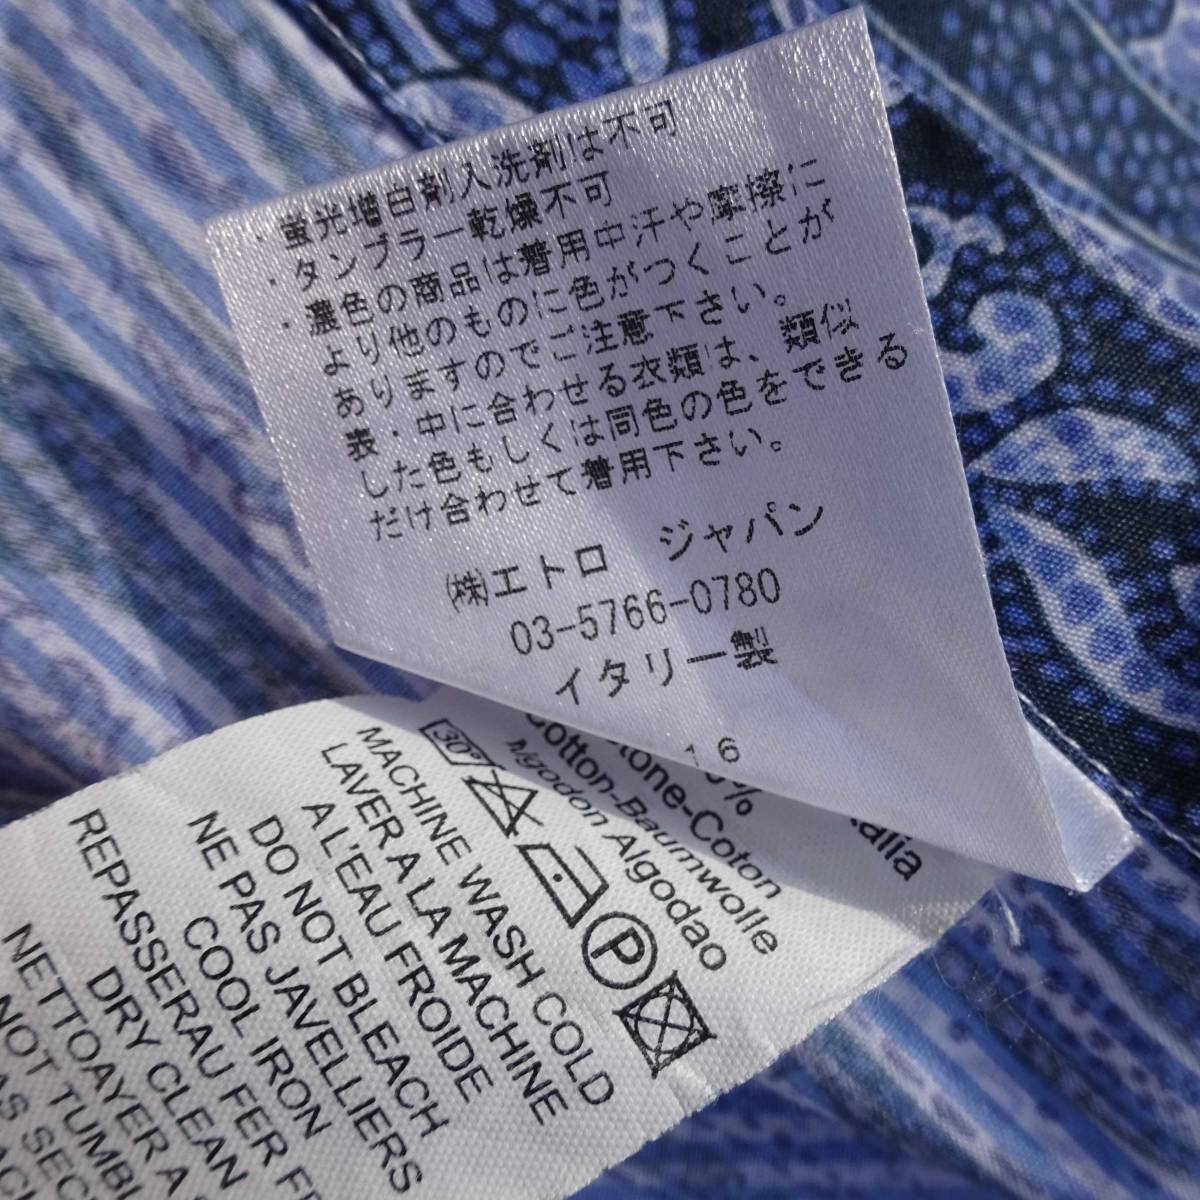  postage included Italy made corporation Etro Japan Etro ETRO total pattern design shirt long sleeve dress shirt peiz Lee Italy made feeling of luxury men's S